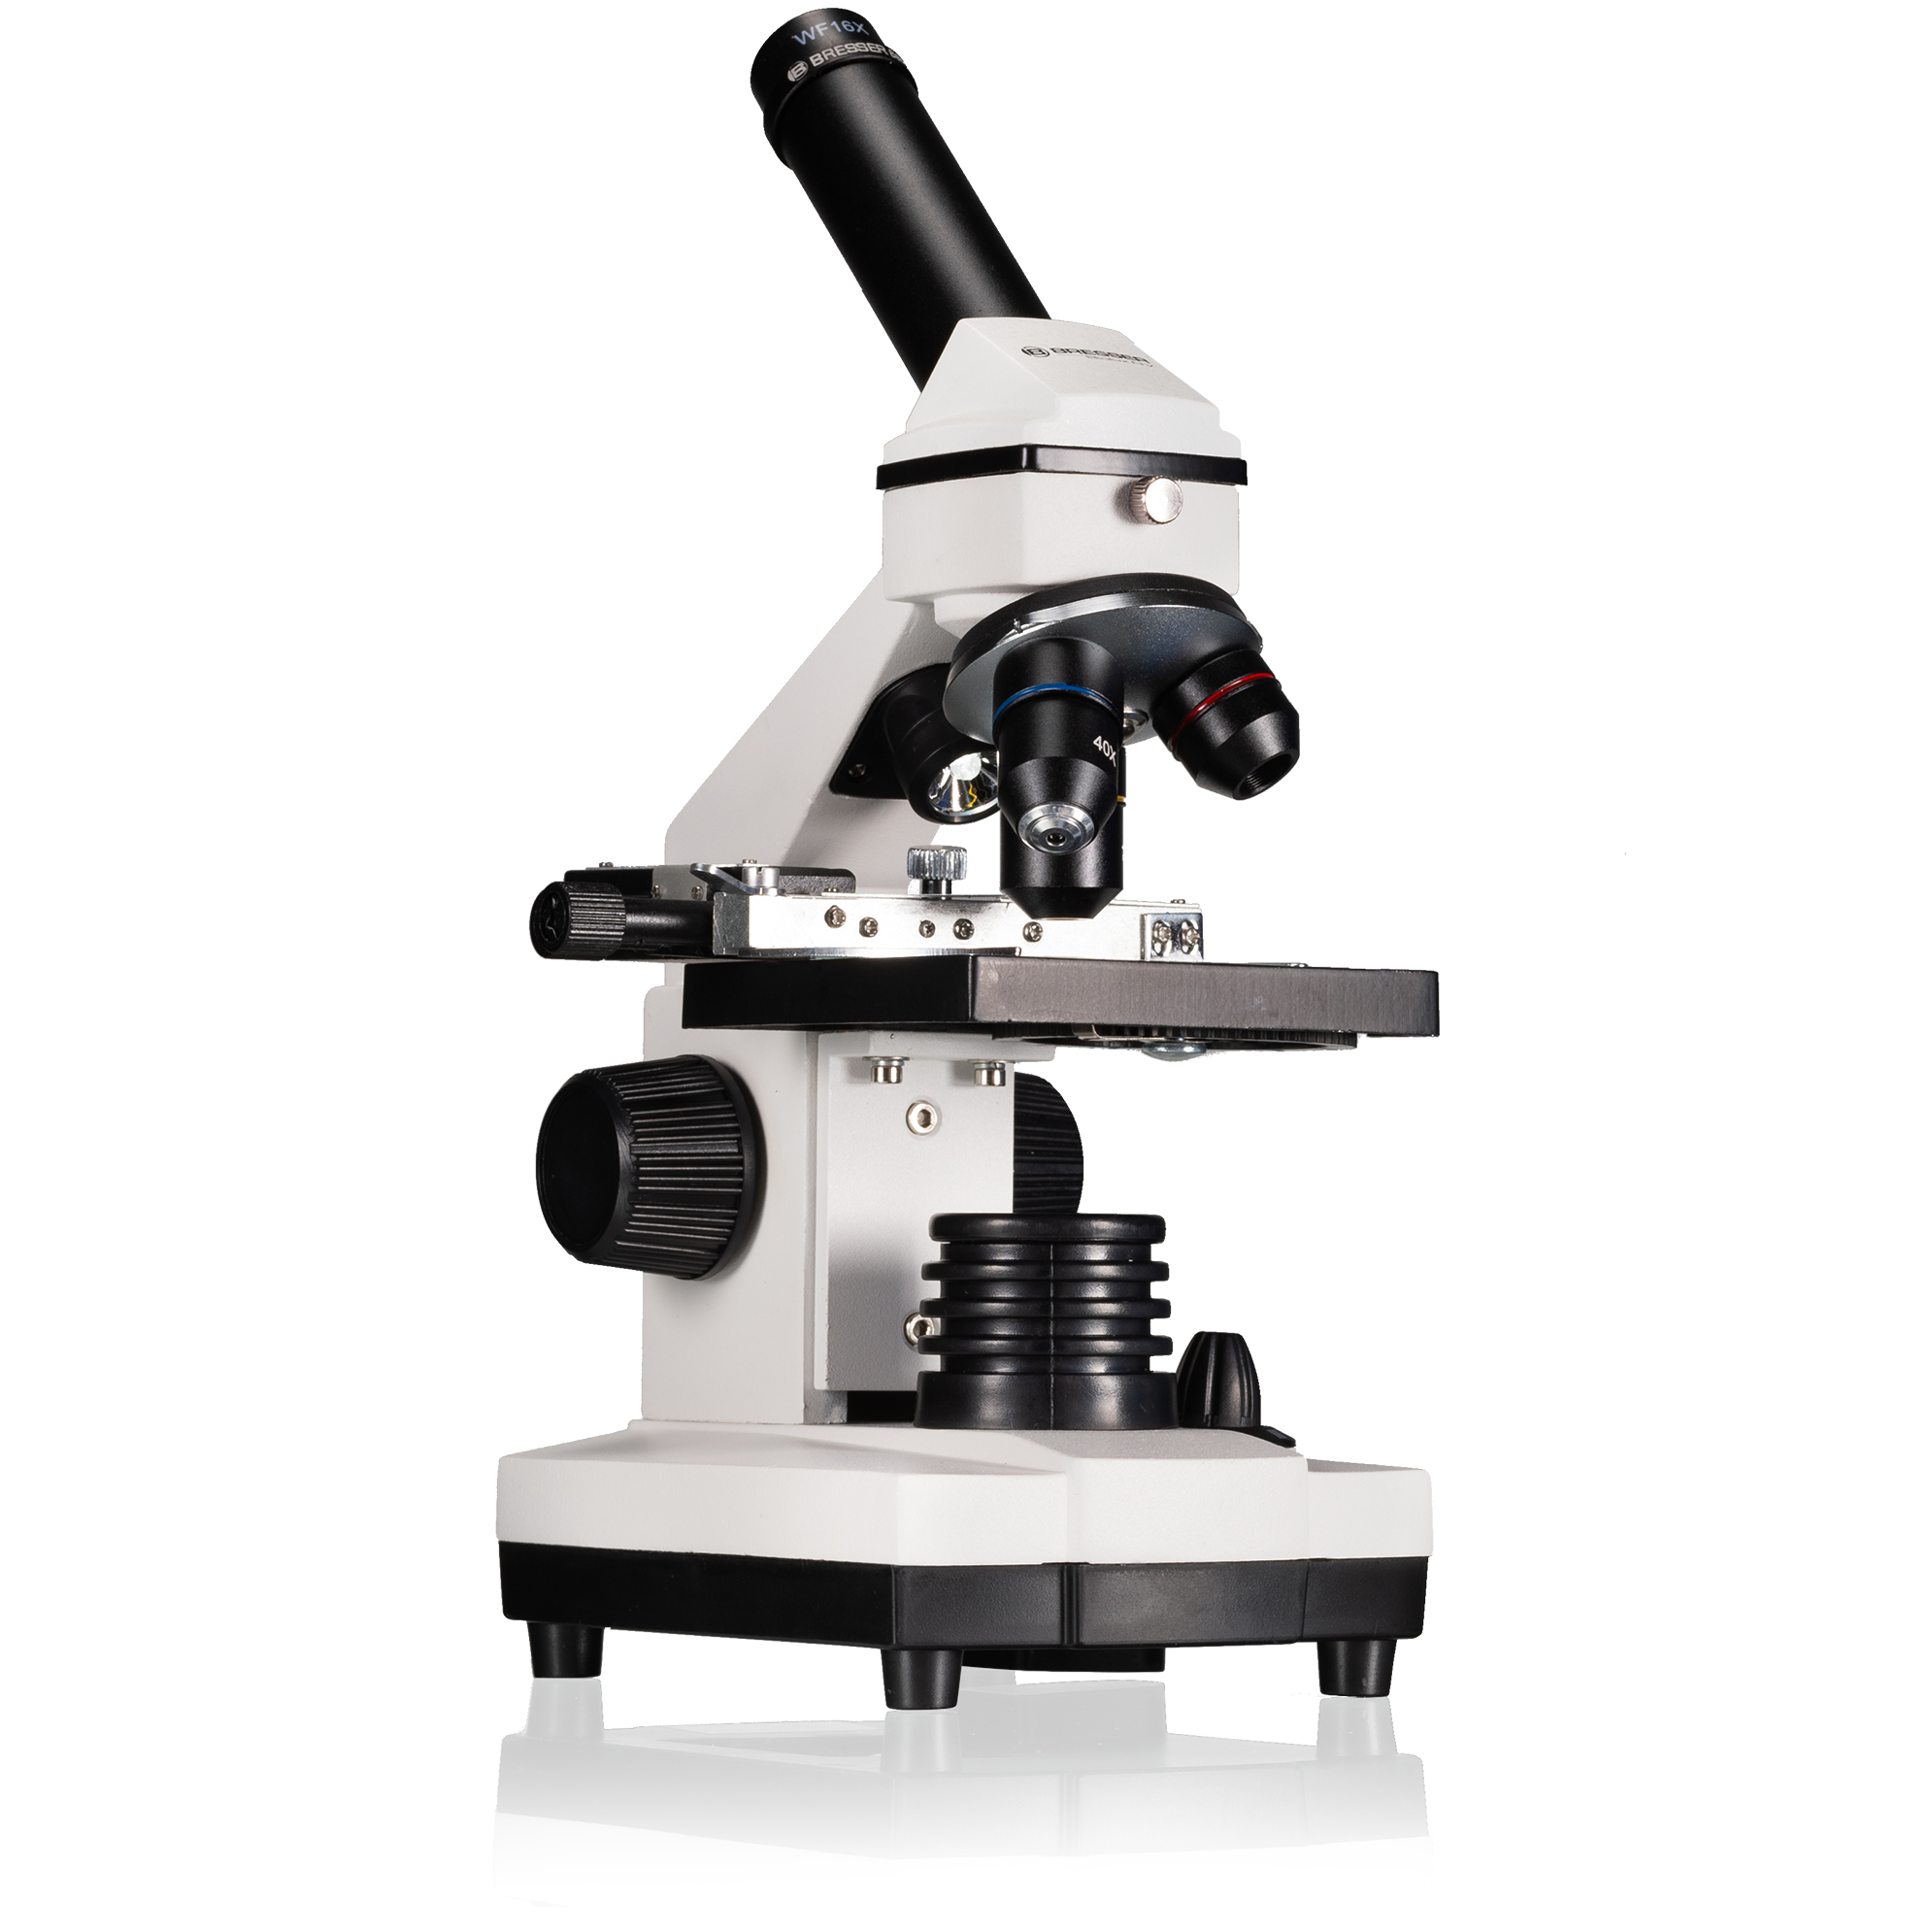 Bresser | BRESSER Biolux NV 20x-1280x Microscope with HD USB Camera |  Expand Your Horizon